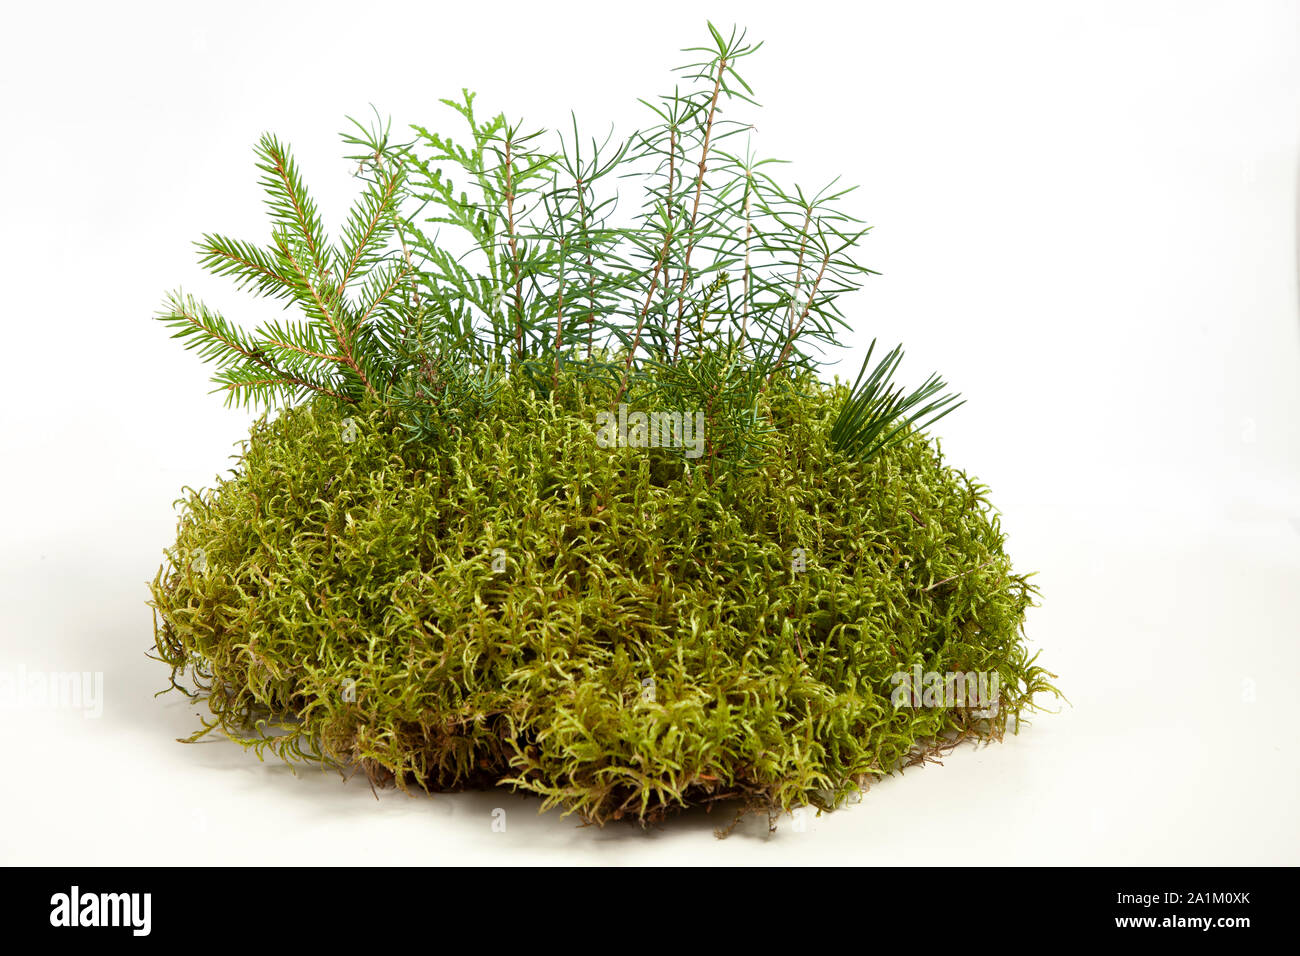 Moss isolated on a white background Stock Photo